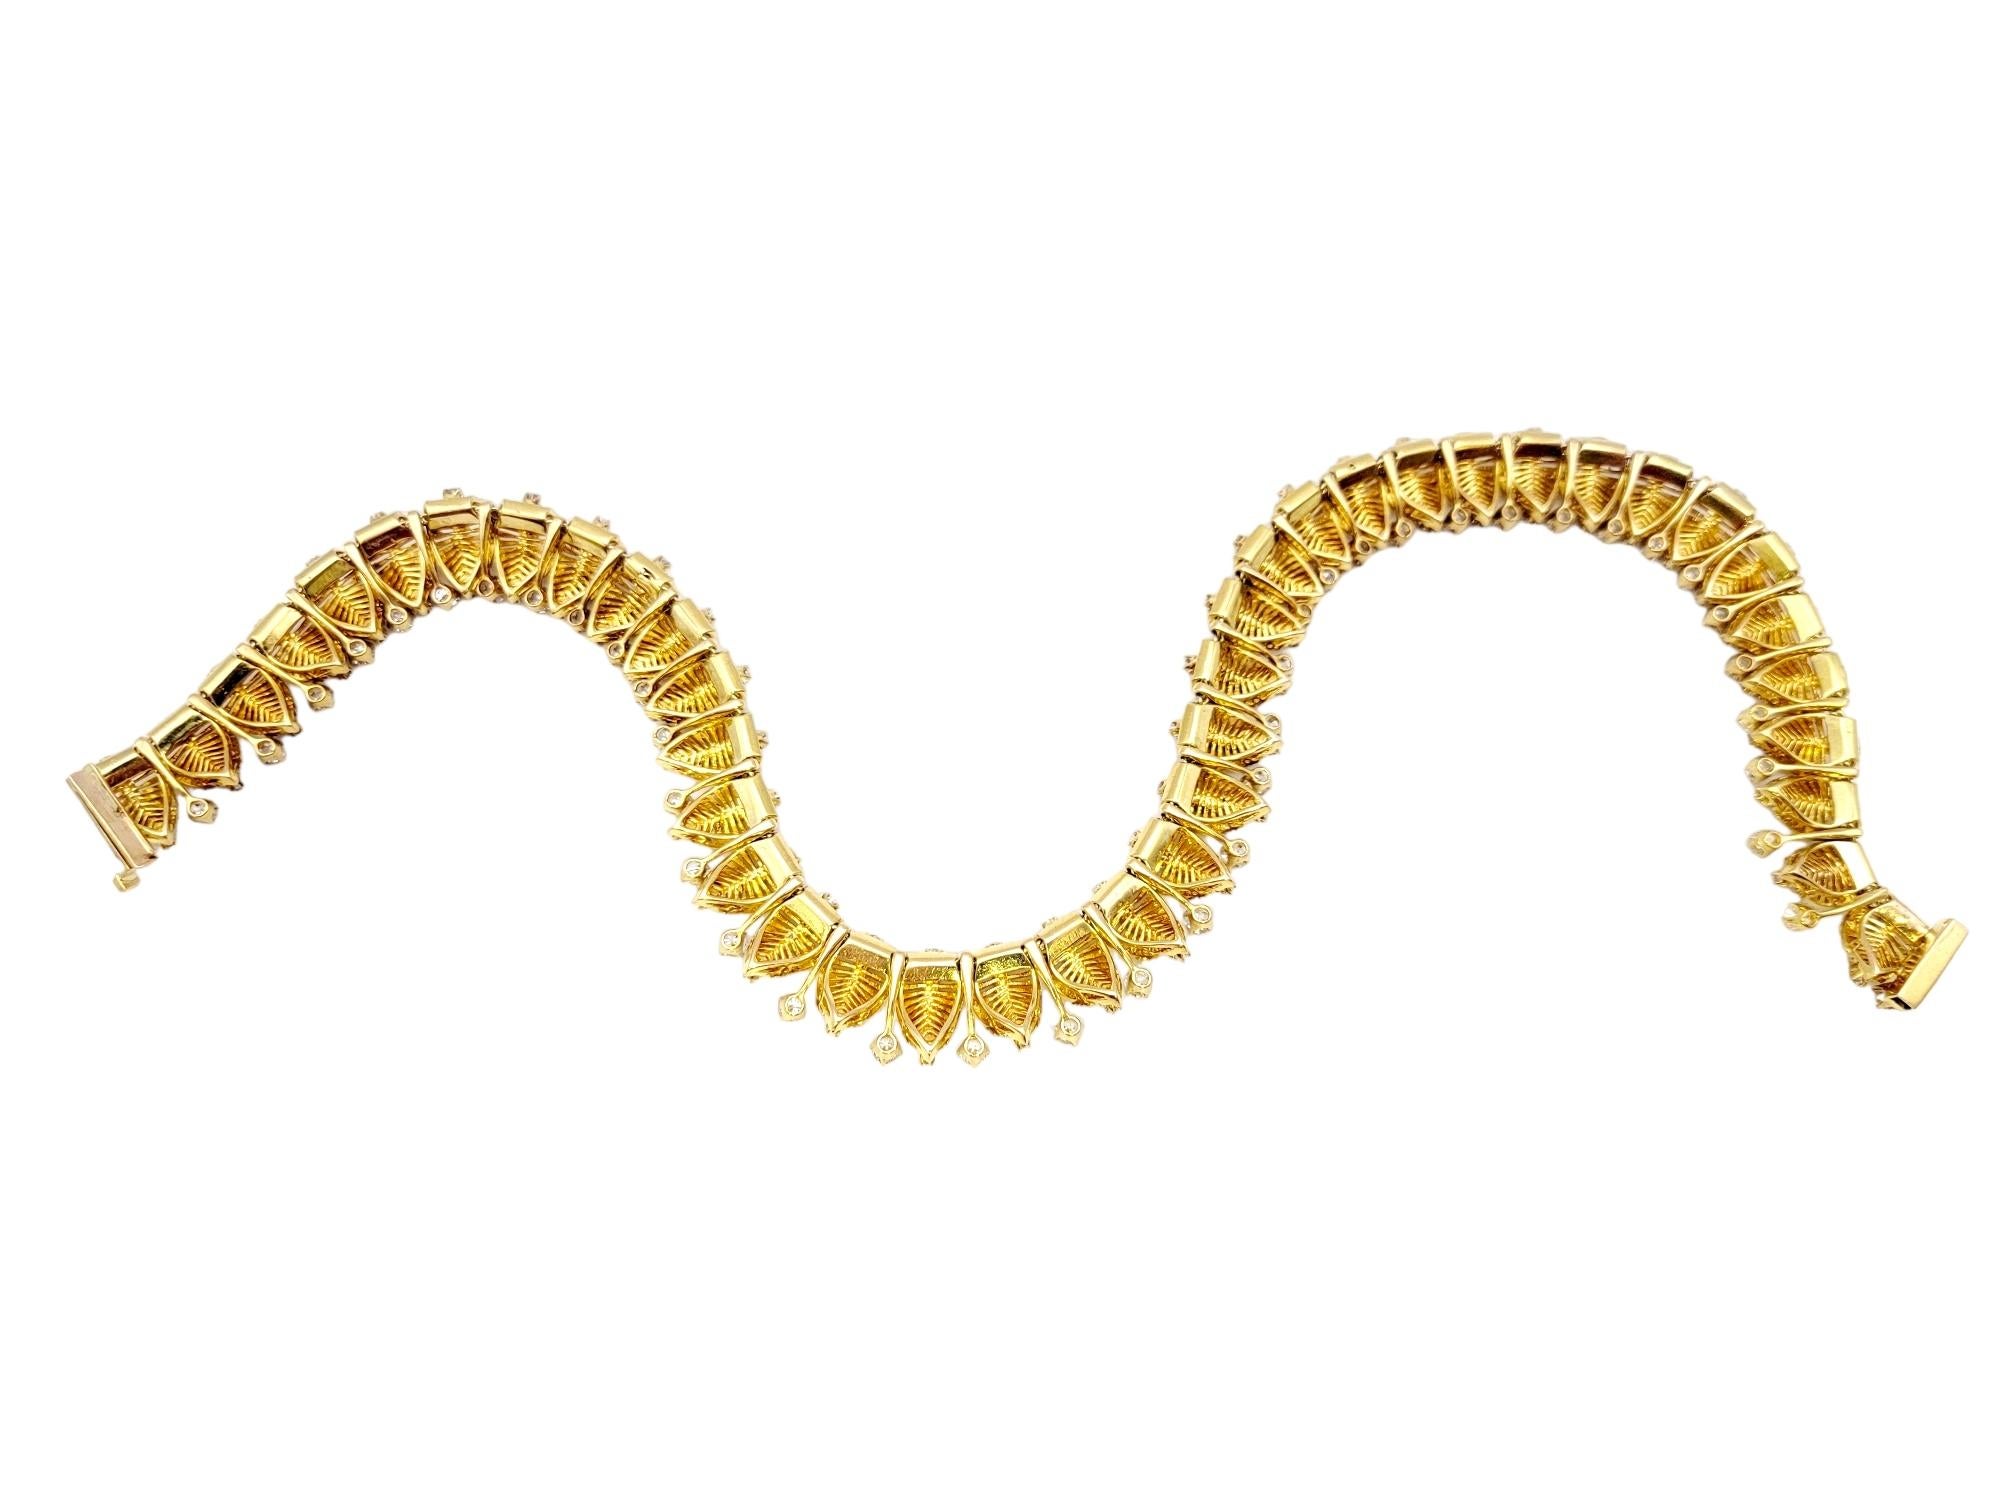 Curved Diamond Leaf and Bar Strand Articulated Necklace in 18 Karat Gold 3